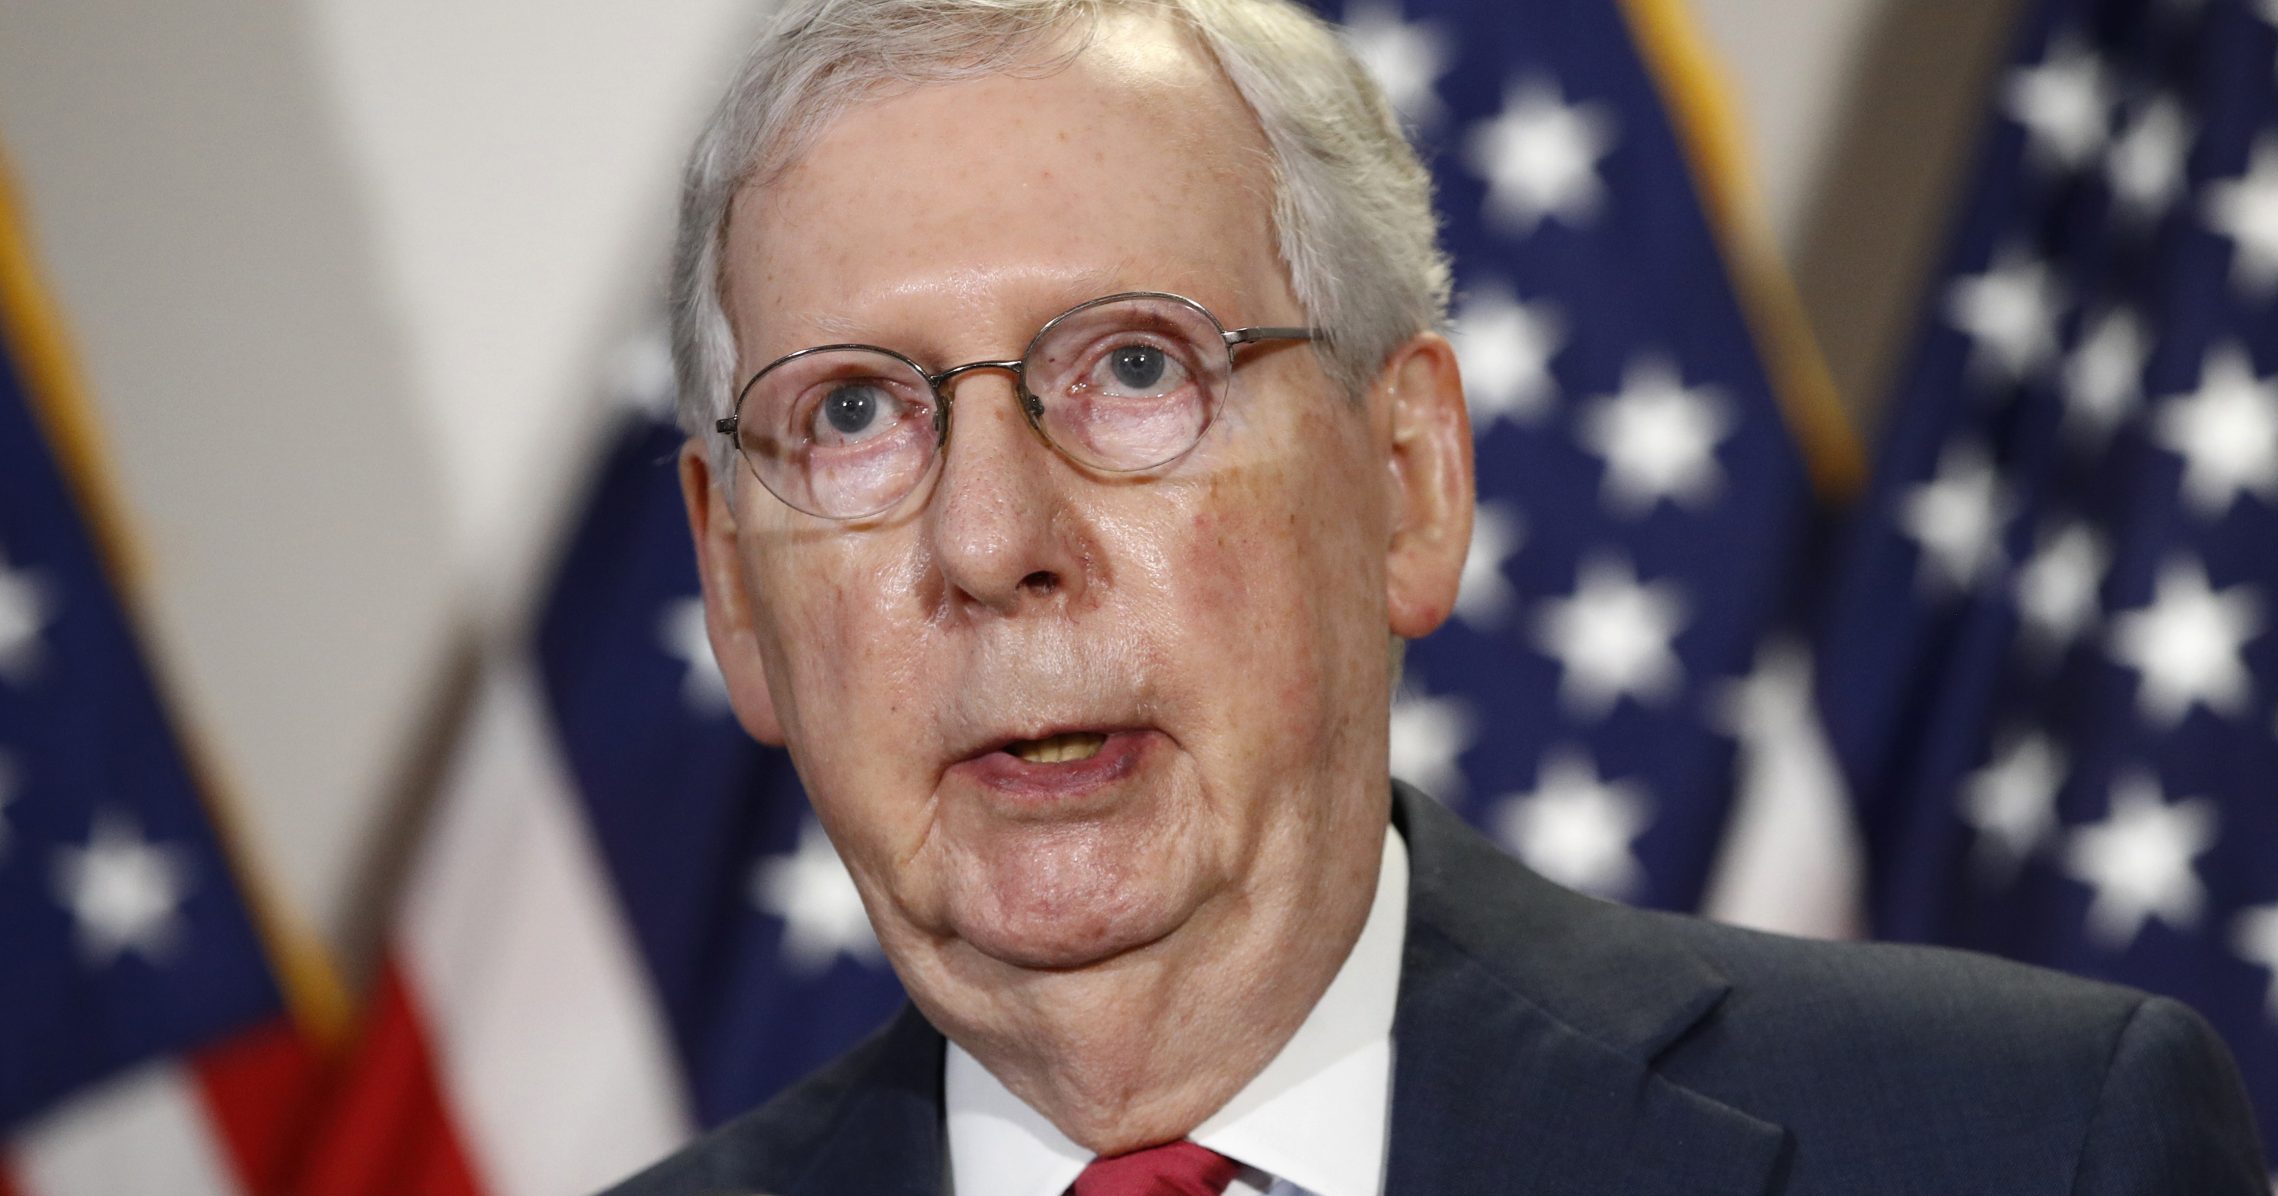 Senate Majority Leader Mitch McConnell of Kentucky speaks with reporters May 19, 2020, after meeting with Senate Republicans at their weekly luncheon on Capitol Hill in Washington.